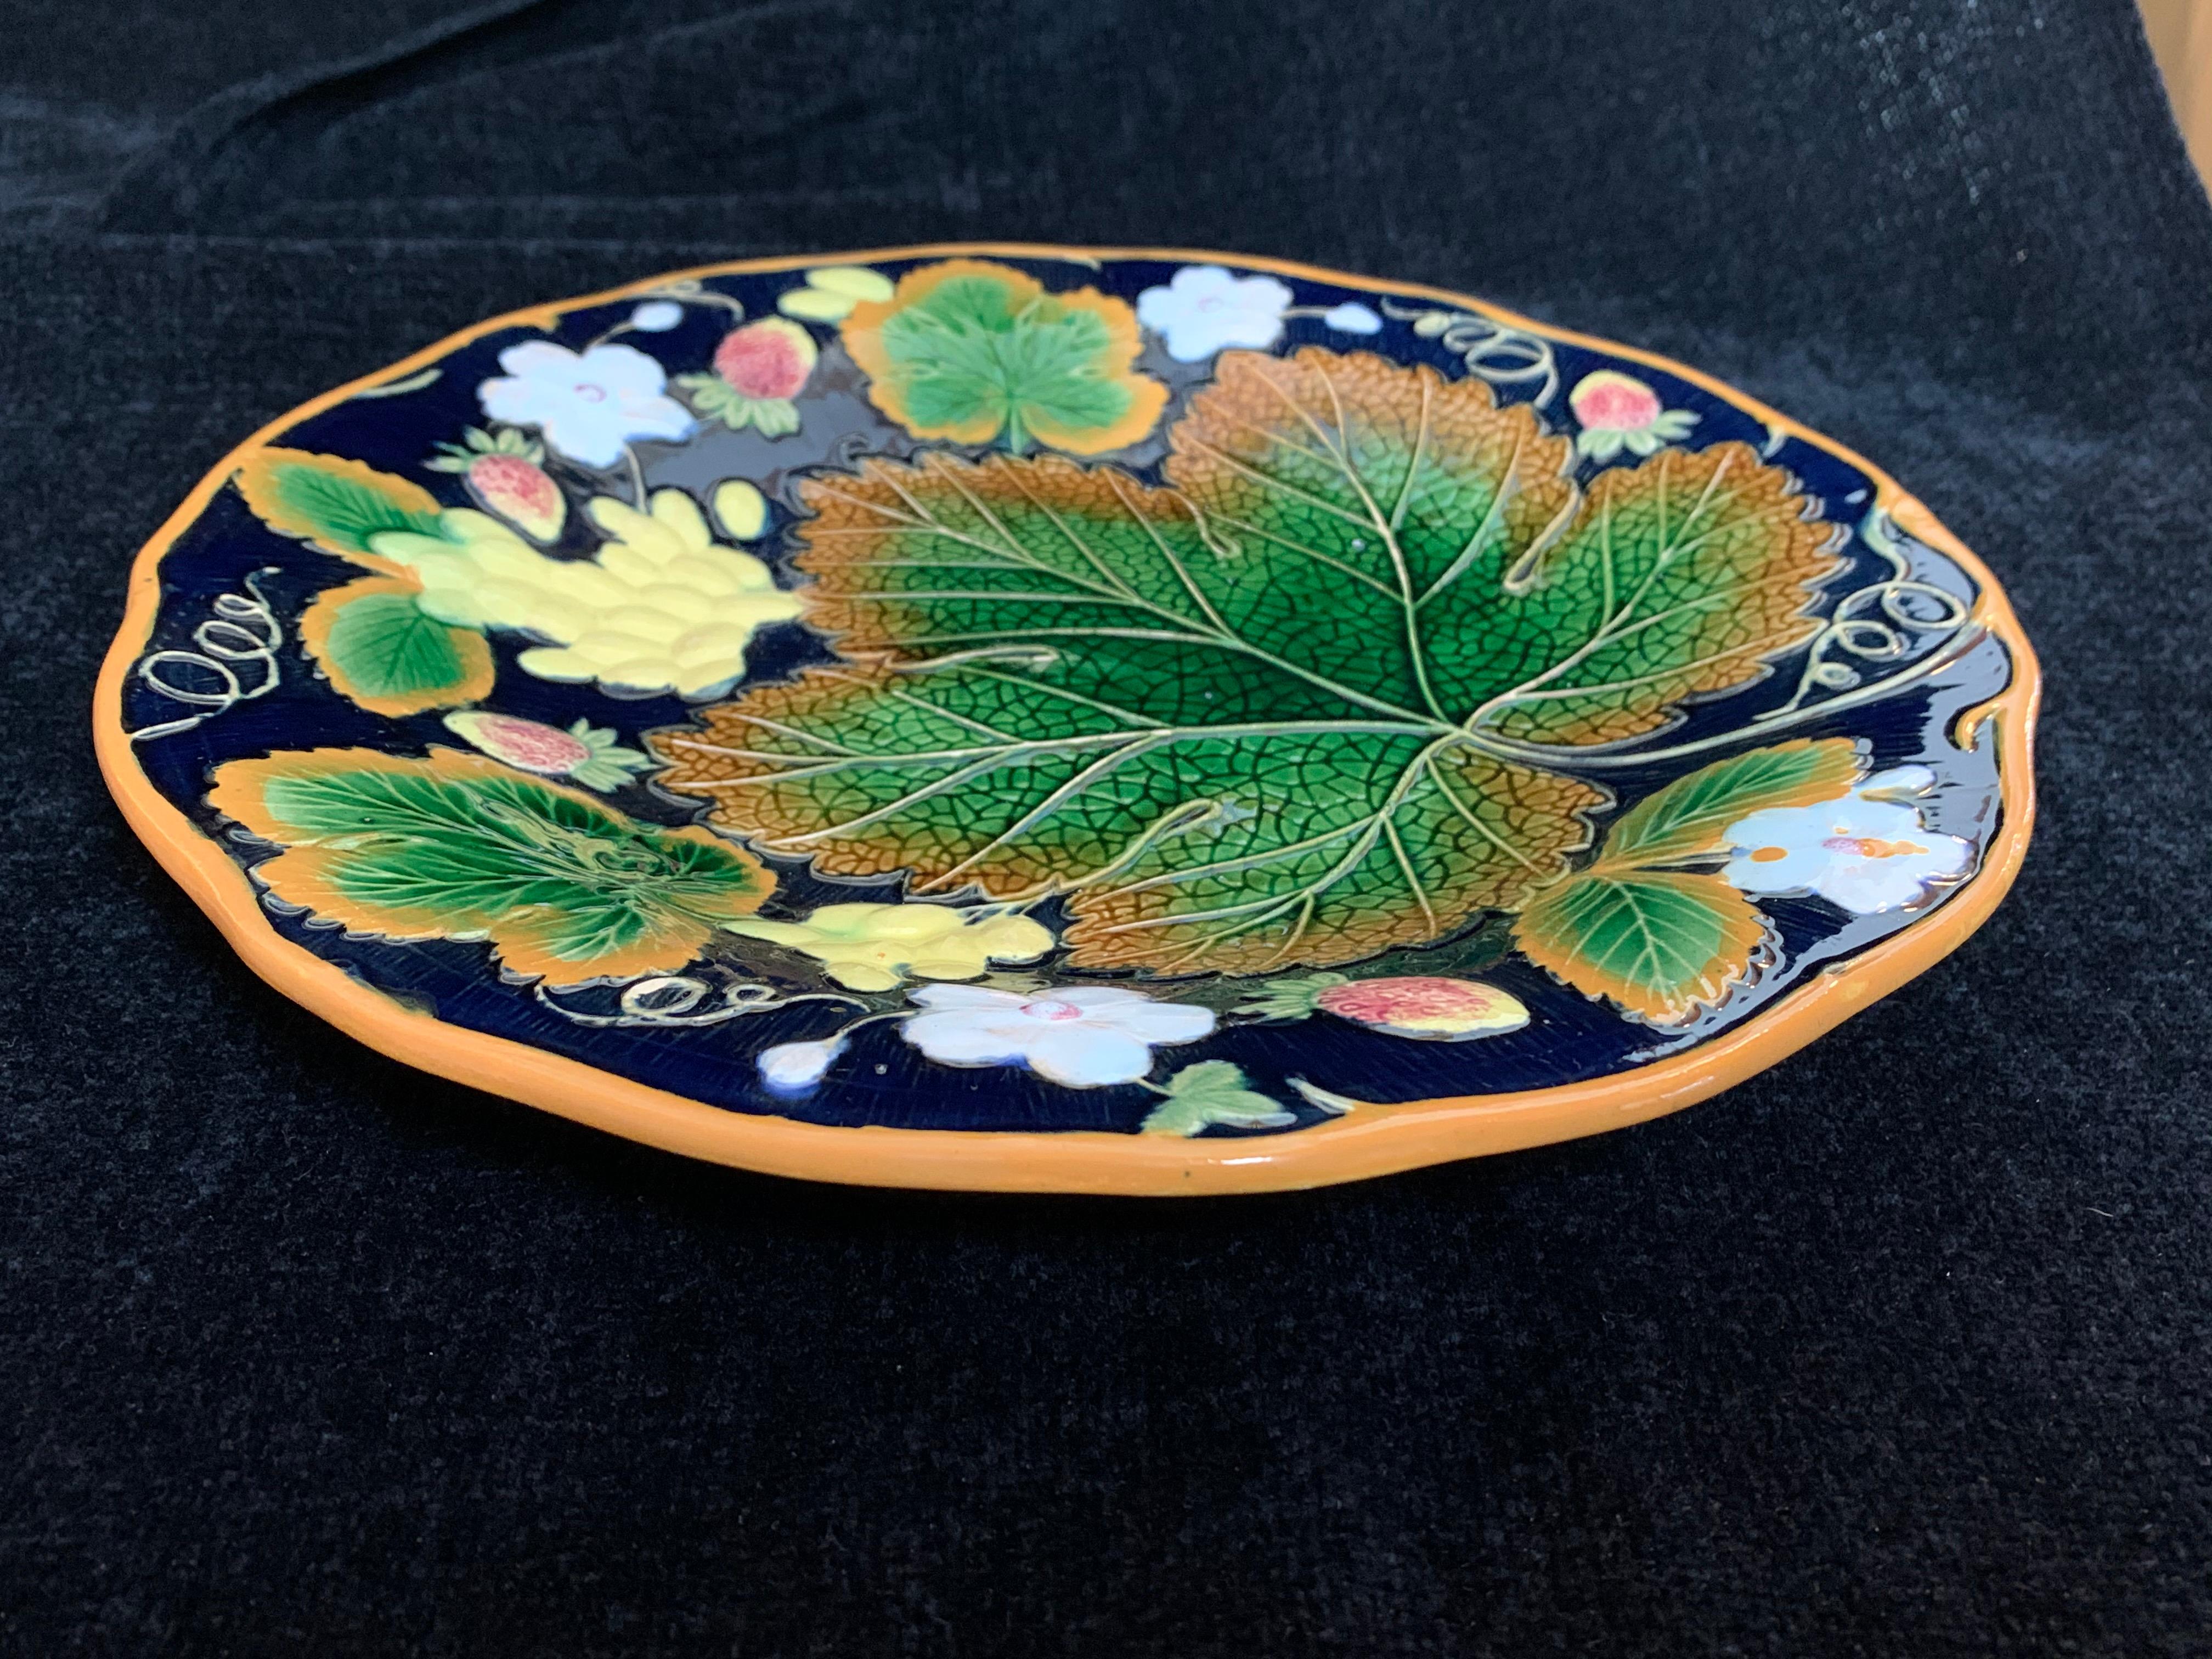 William Brownfield Majolica leaf and strawberry 9-inch plate in cobalt blue, English, 1876, in highly desirable cobalt ground. Impressed mark to reverse 'BROWNFIELD' with date code: '7/76' for July 1876.
In excellent antique condition, with no